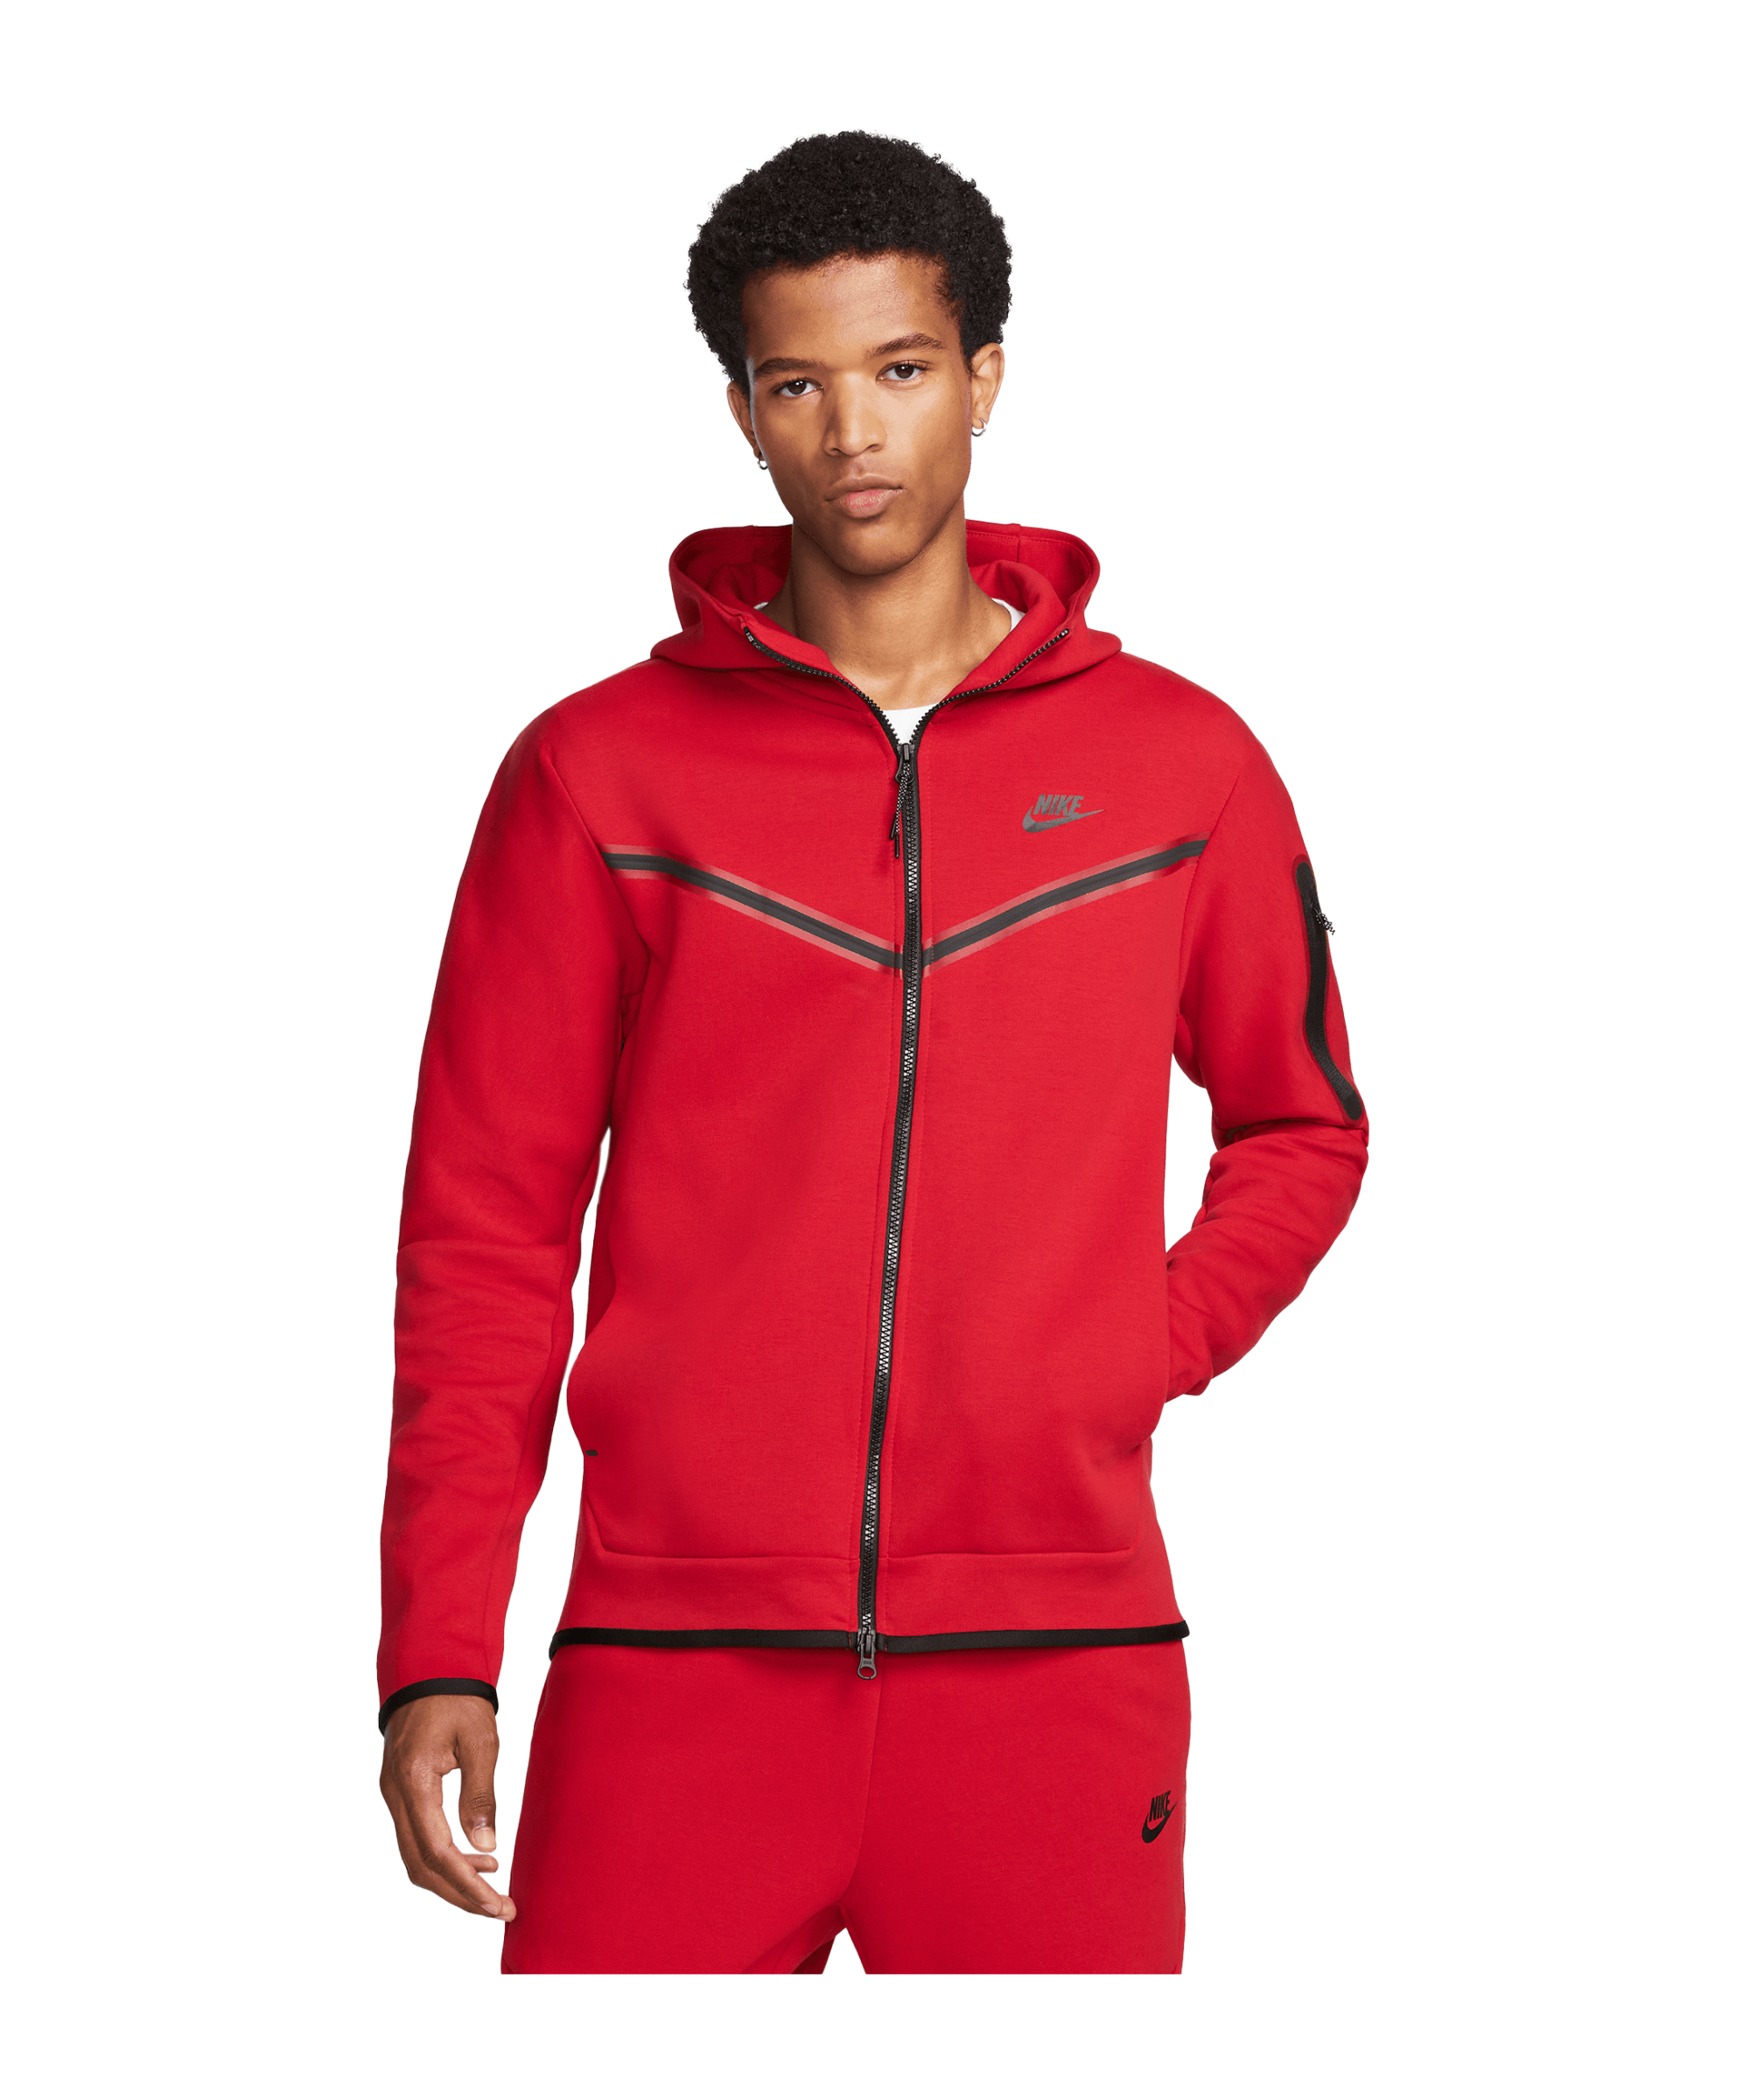 Whats the difference between the new and old red tech fleece? : r/Nike